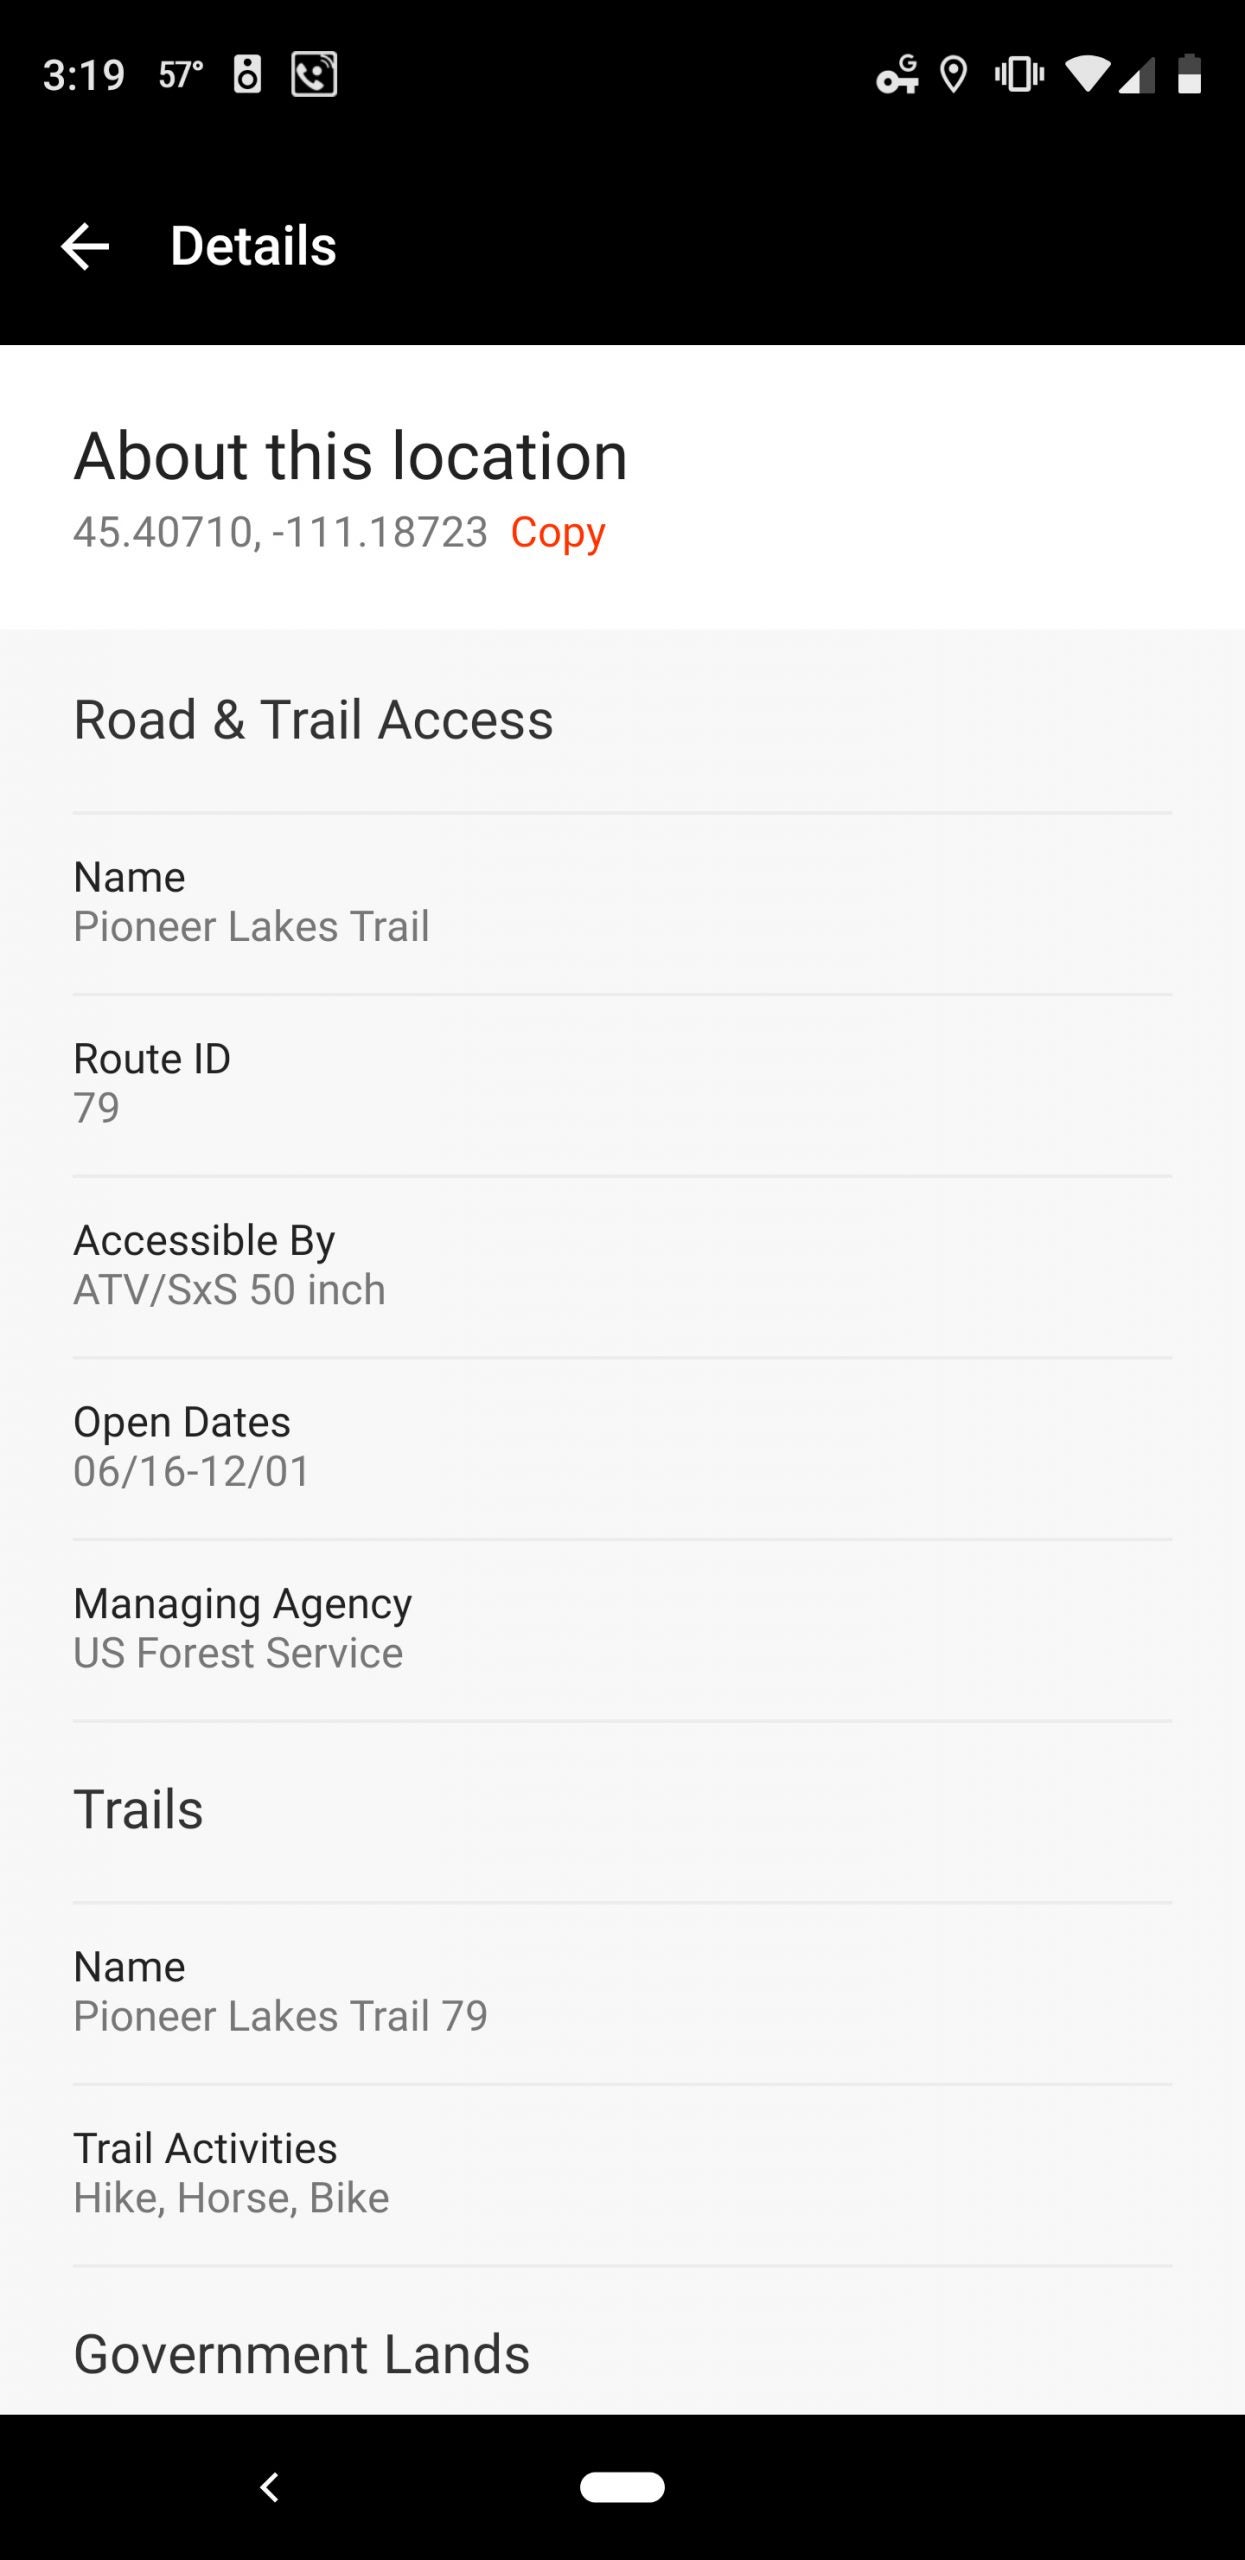 Clicking the trail I’d need to use to get to that lake brings up all its usage data. Here I can see that I’ll need to use a dirt bike or ATV to get there (or hike, but it’s a long way) and that the trail opens on June 16.